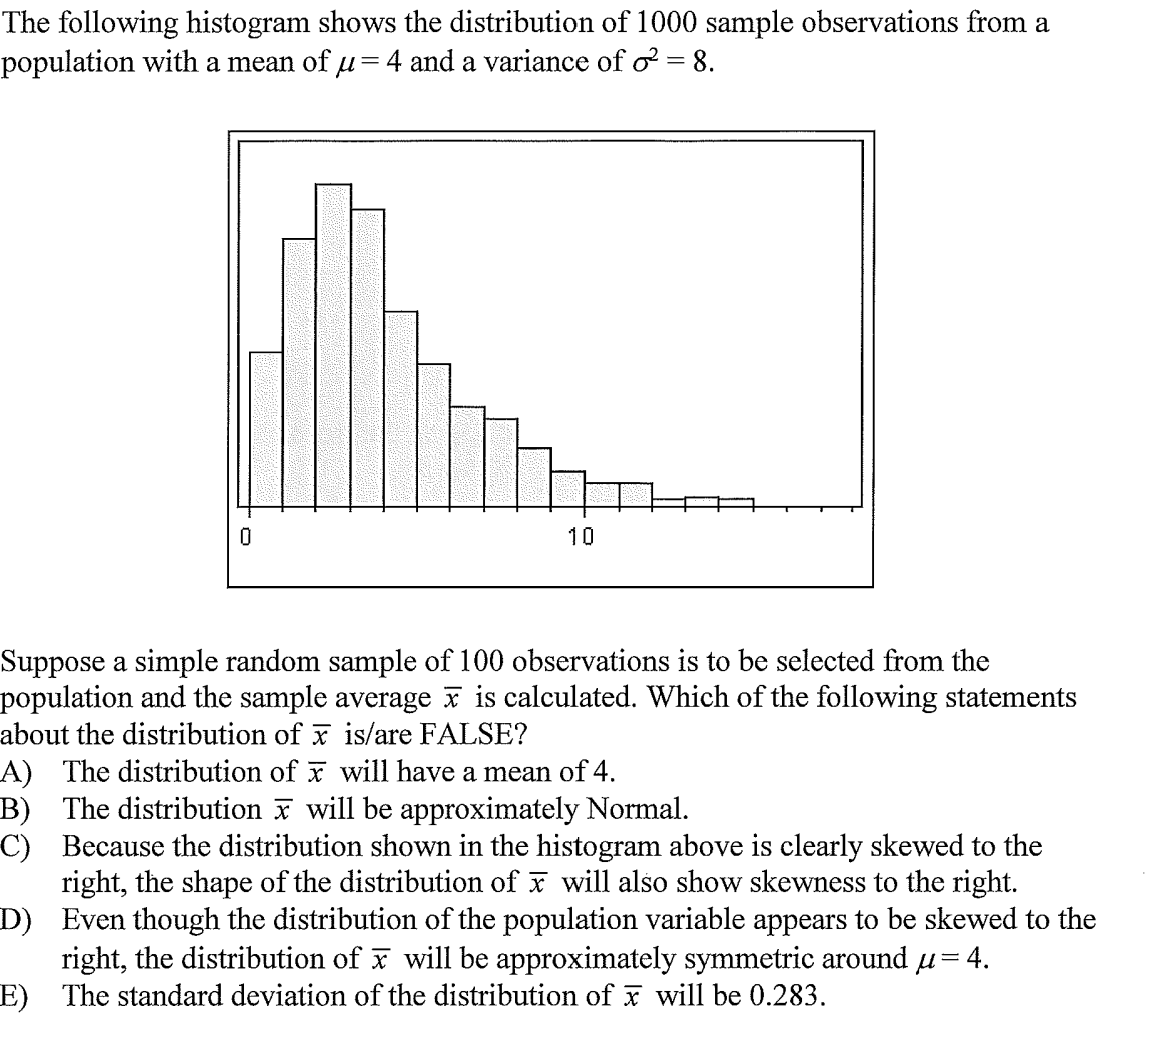 The following histogram shows the distribution of 1000 sample observations from a
population with a mean of u=4 and a variance of o = 8.
10
Suppose a simple random sample of 100 observations is to be selected from the
population and the sample average x is calculated. Which of the following statements
about the distribution of is/are FALSE?
A) The distribution of x will have a mean of 4.
B) The distribution x will be approximately Normal.
C) Because the distribution shown in the histogram above is clearly skewed to the
right, the shape of the distribution of x will also show skewness to the right.
D) Even though the distribution of the population variable appears to be skewed to the
right, the distribution of x will be approximately symmetric around u= 4.
E) The standard deviation of the distribution of x will be 0.283.
